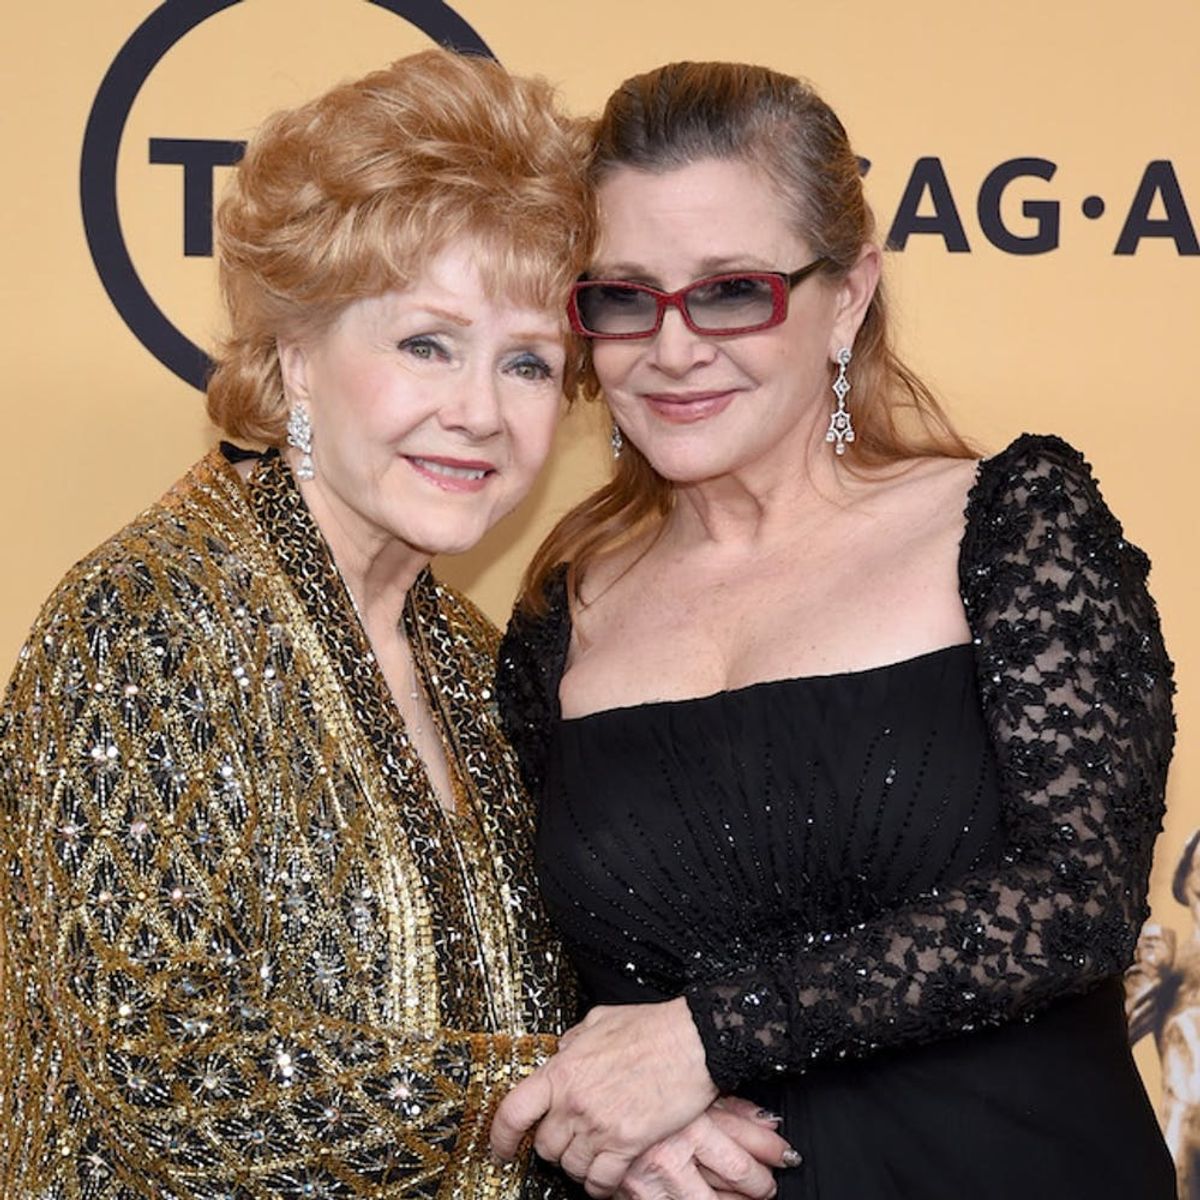 Morning Buzz: Legendary Actress Debbie Reynolds Dies One Day After Her Daughter Carrie Fisher + More